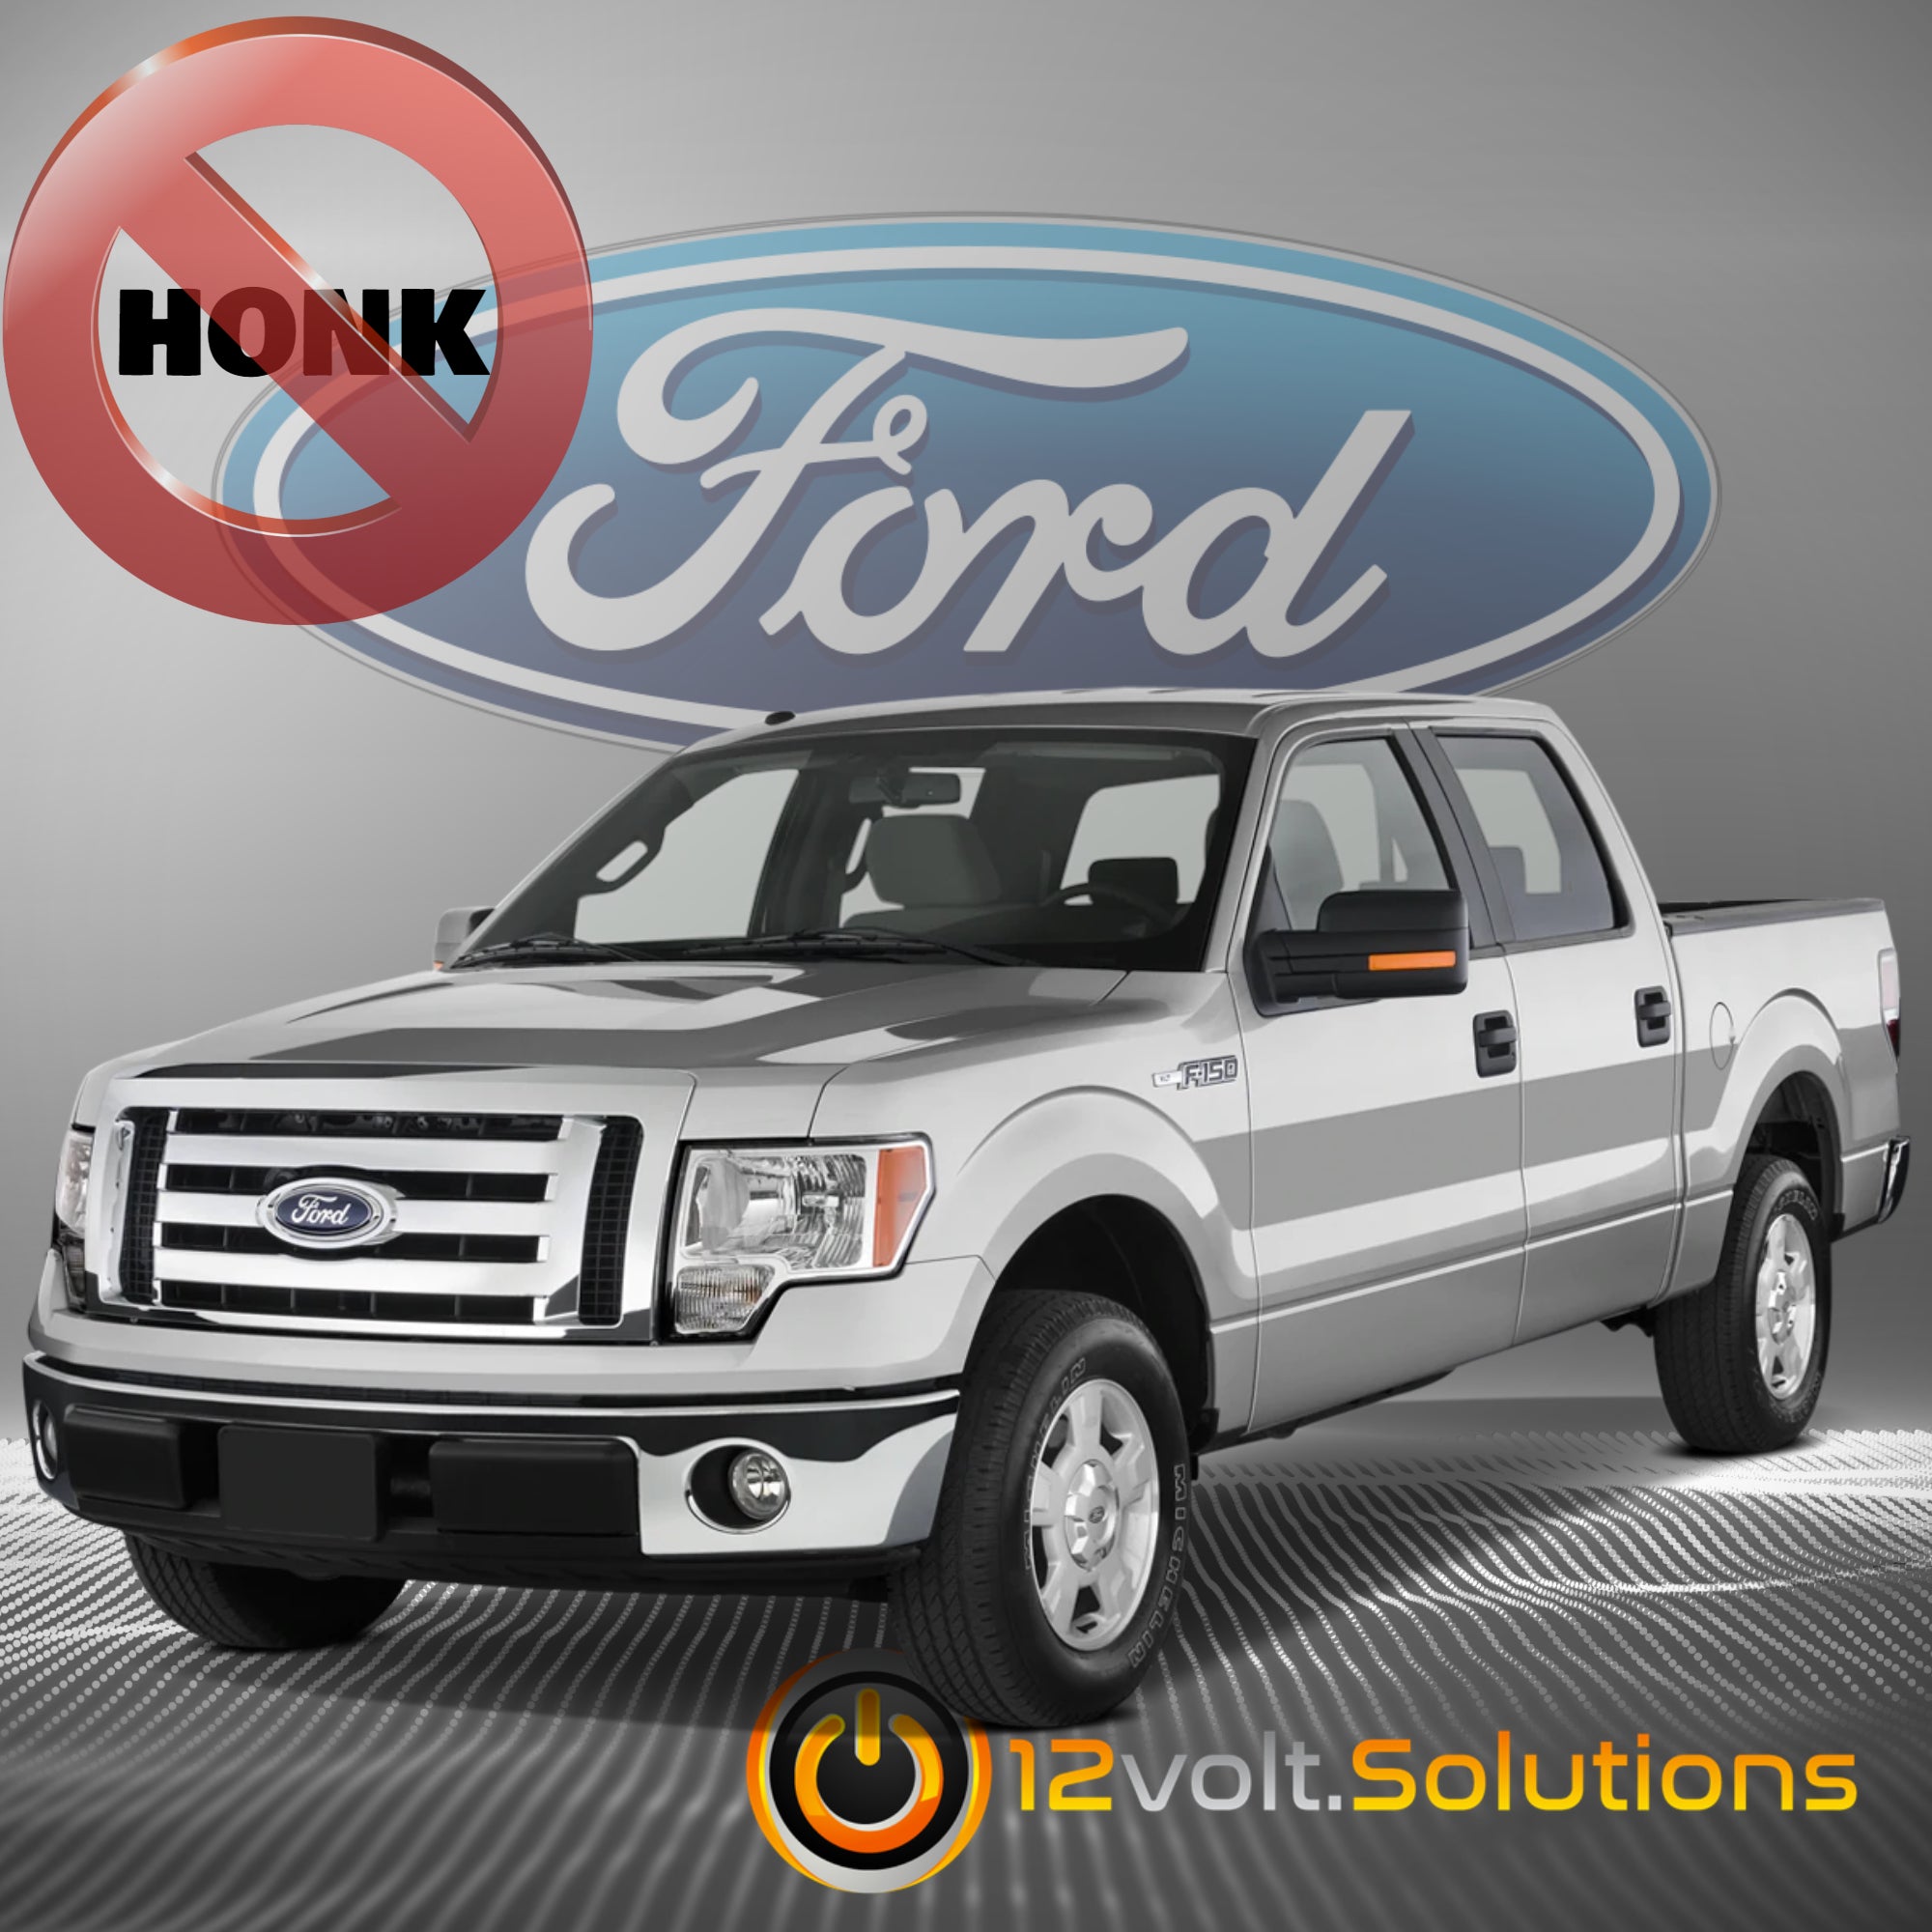 2009-2010 Ford F-150 Remote Start Plug and Play Kit-12Volt.Solutions